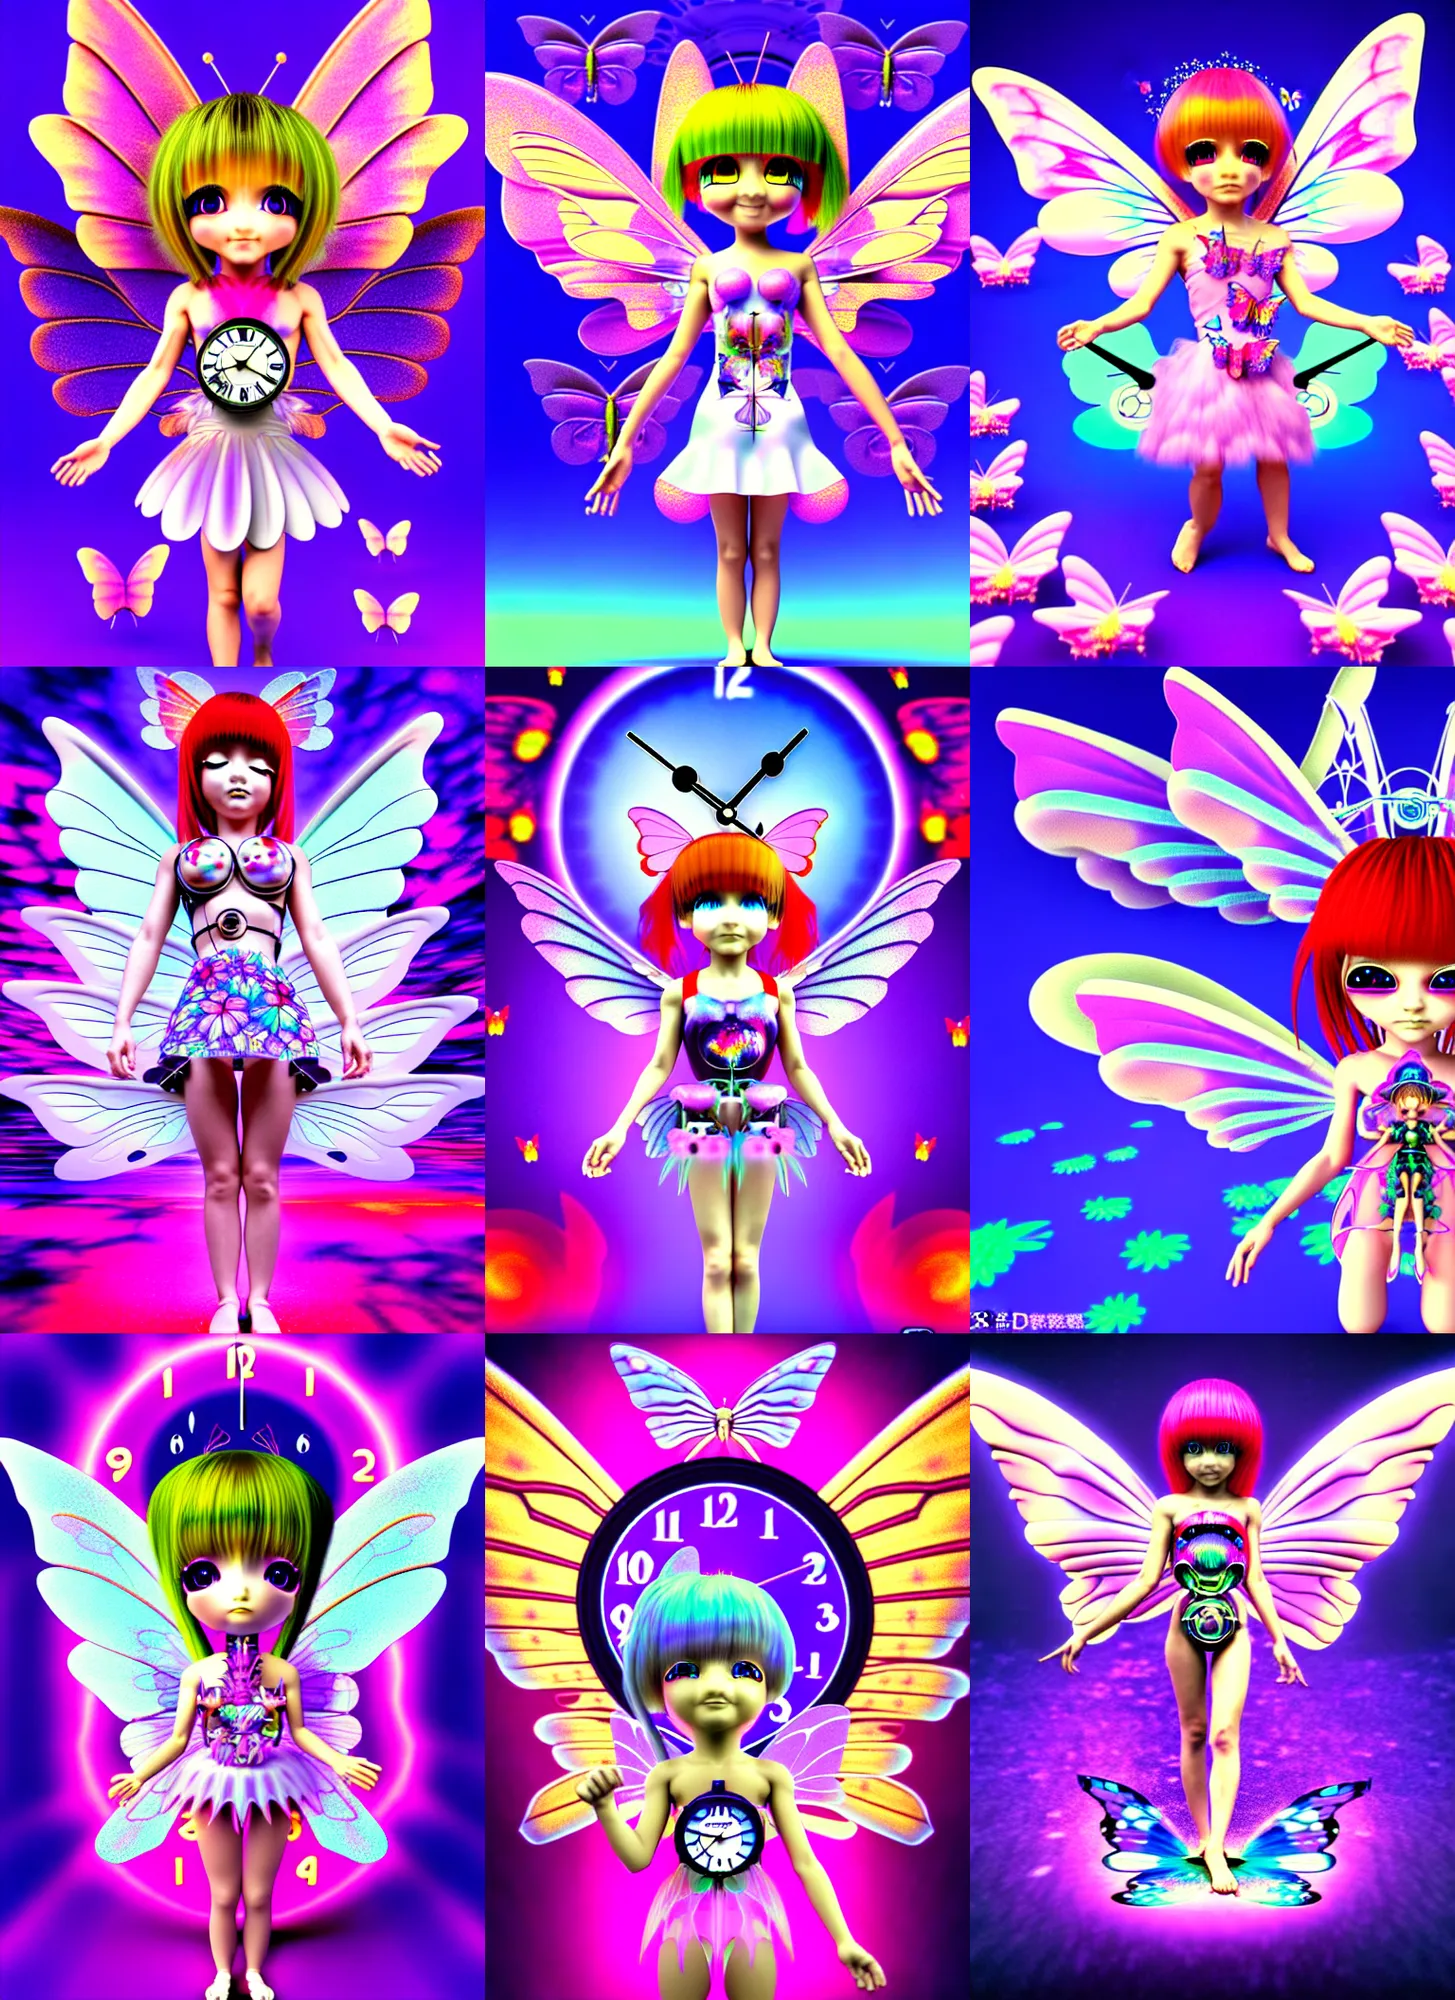 Prompt: 3 d render of chibi clock cyborg fairy with angel wings against a psychedelic surreal background with 3 d butterflies and 3 d flowers n the style of 1 9 9 0's cg graphics 3 d rendered y 2 k aesthetic by ichiro tanida, 3 do magazine, wide shot